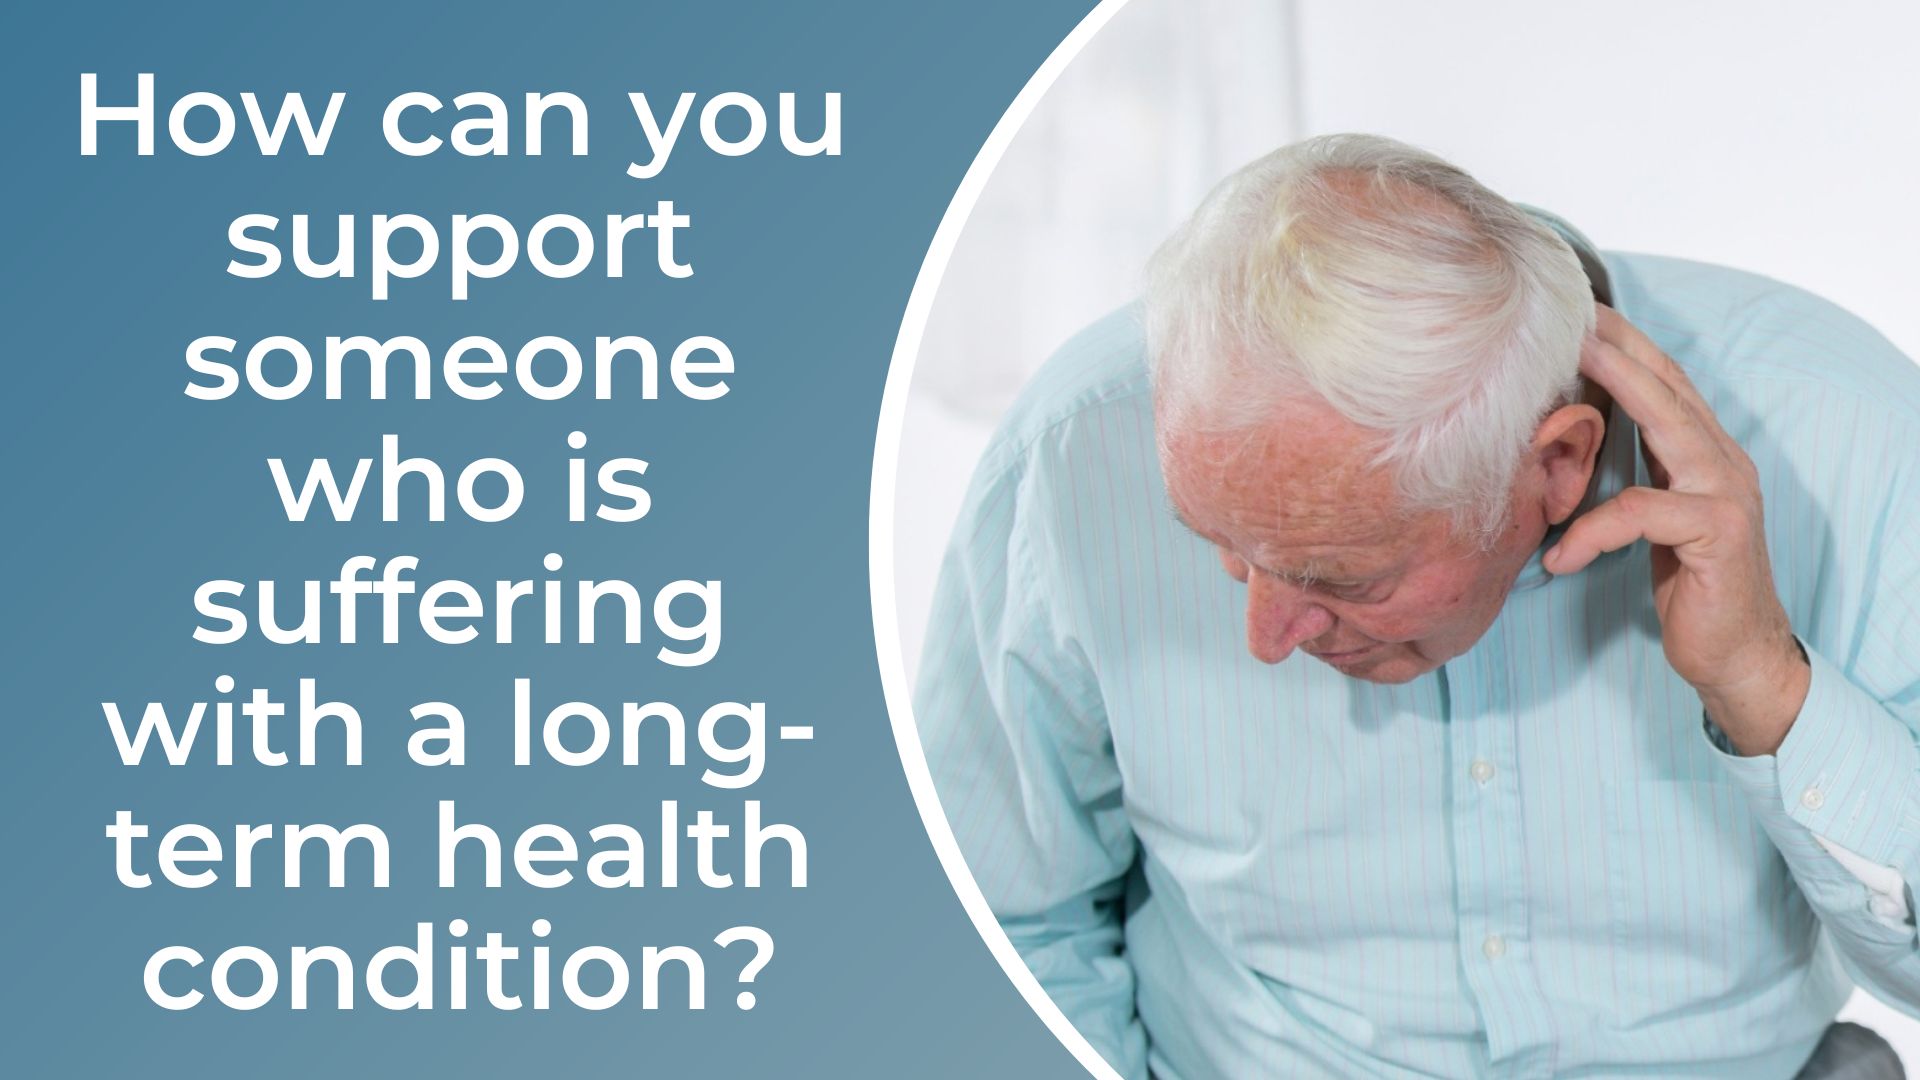 How can you support someone who is suffering with a long-term health condition